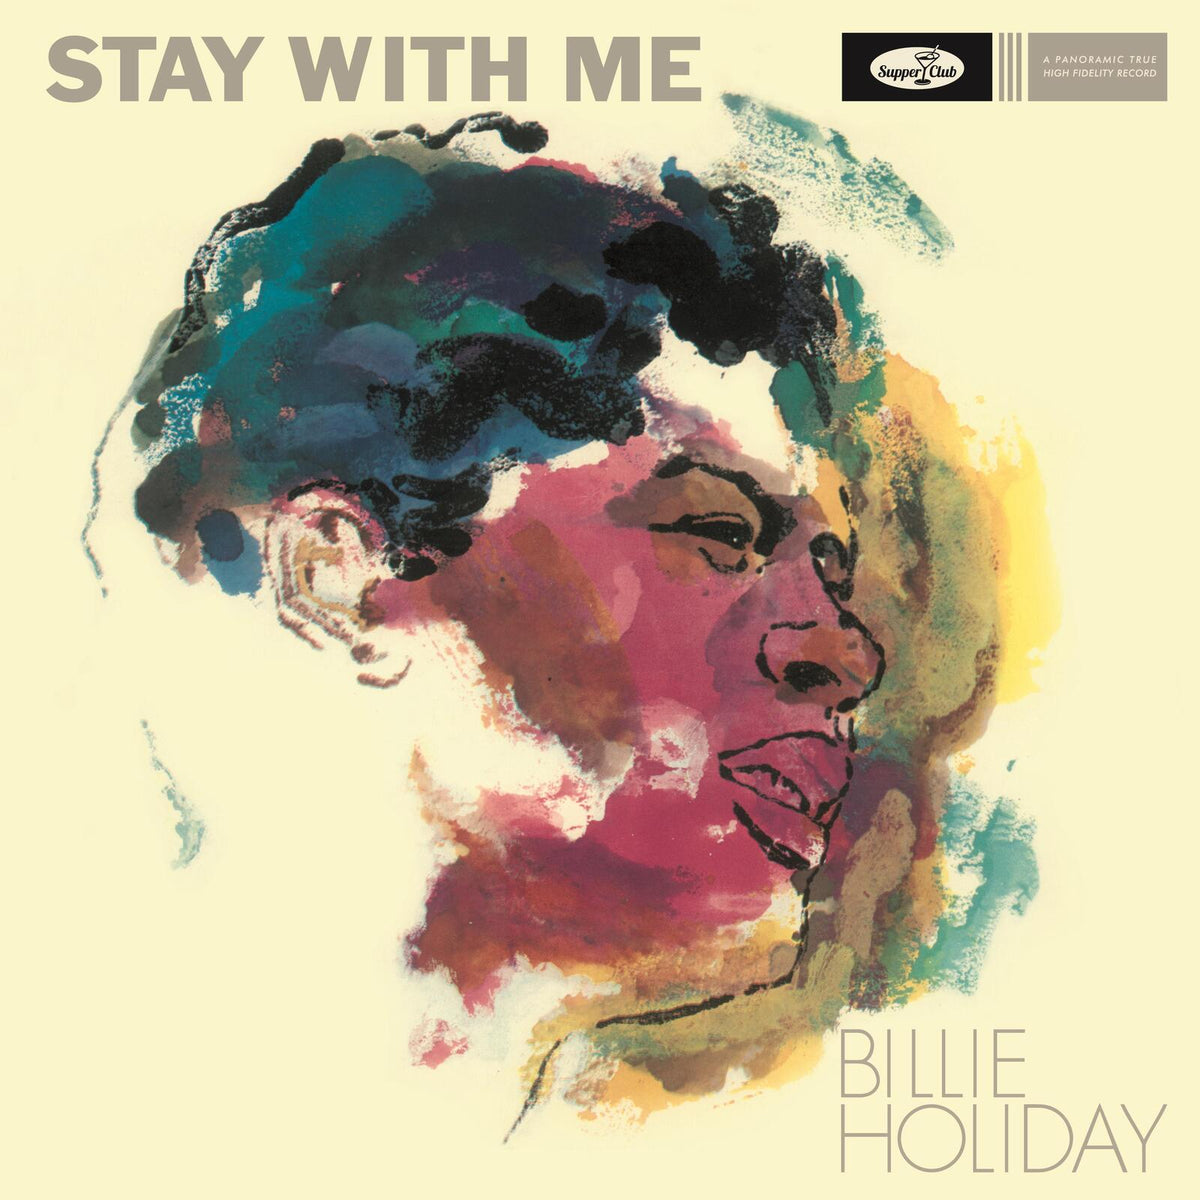 Billie Holiday - Stay With Me (Limited Edition o 1000) - 046SP